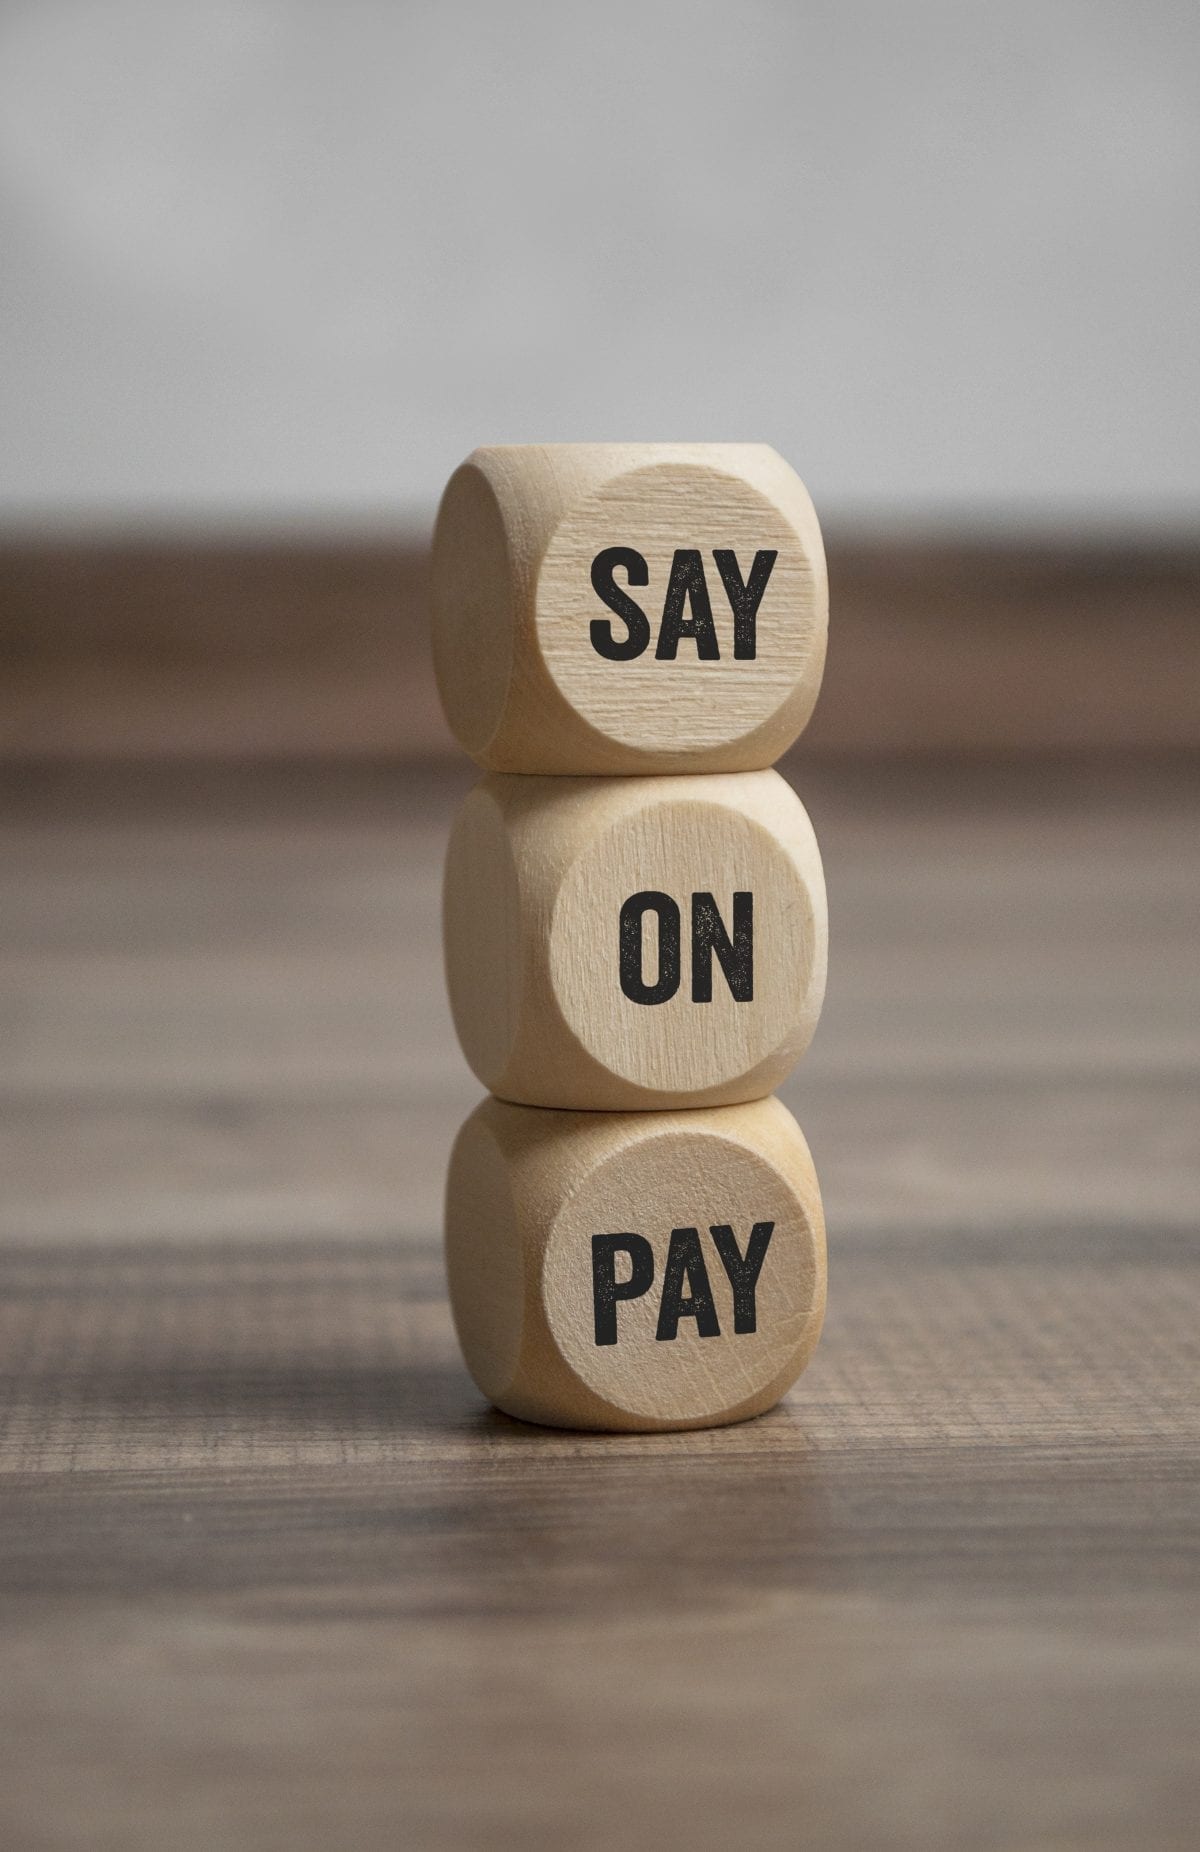 “Say on Pay” Legislation: A Brief and Non-Binding Overview